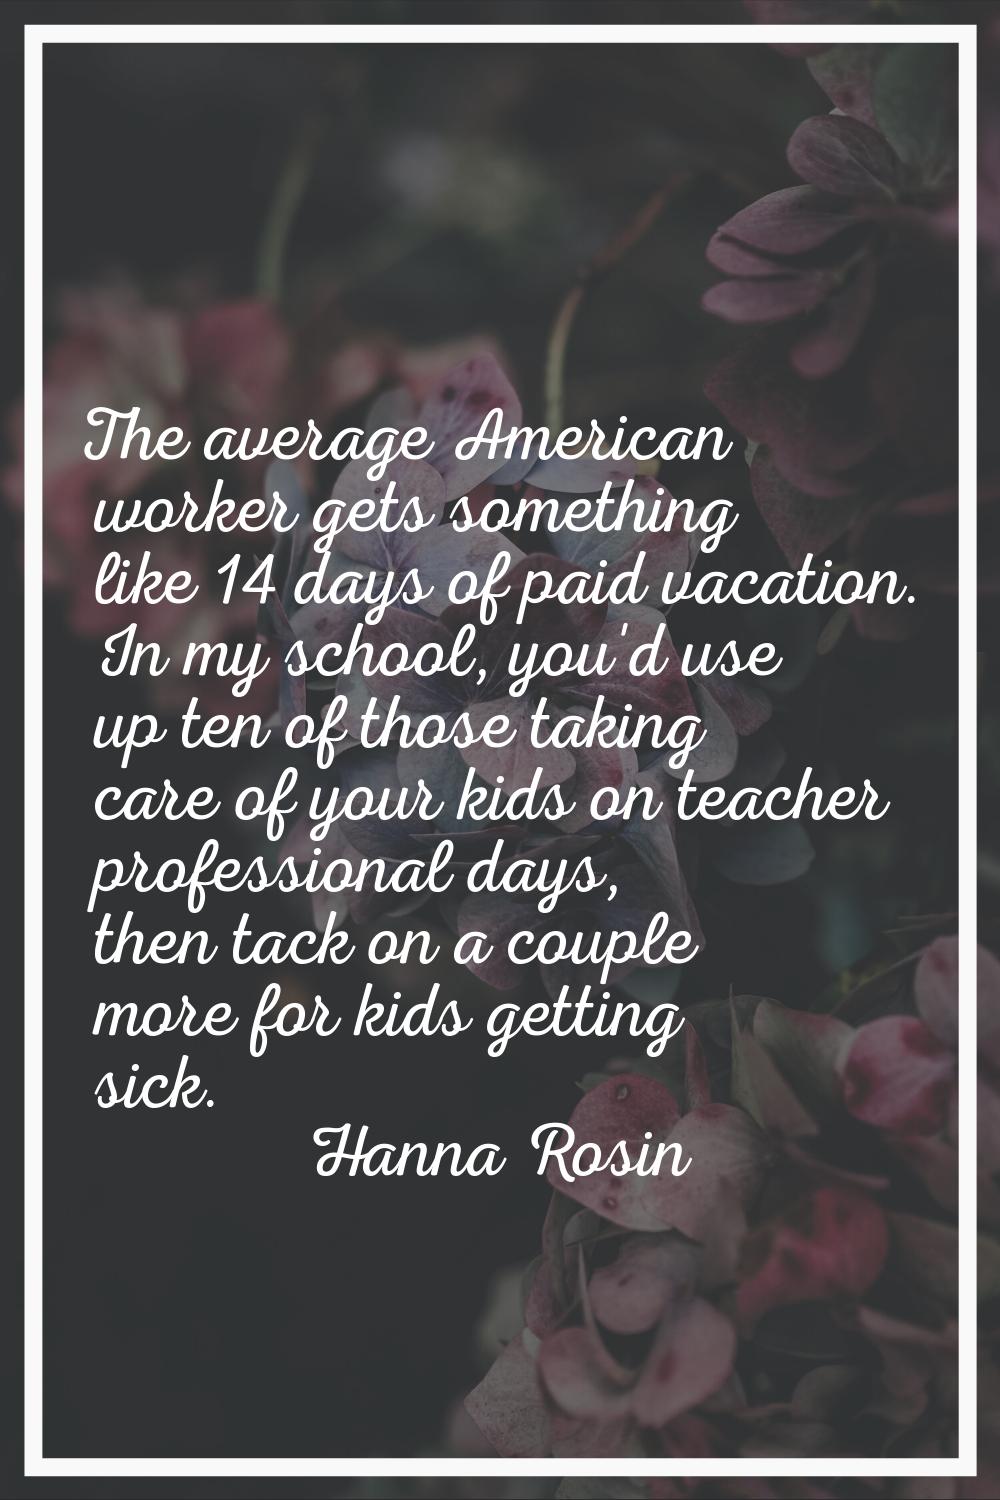 The average American worker gets something like 14 days of paid vacation. In my school, you'd use u